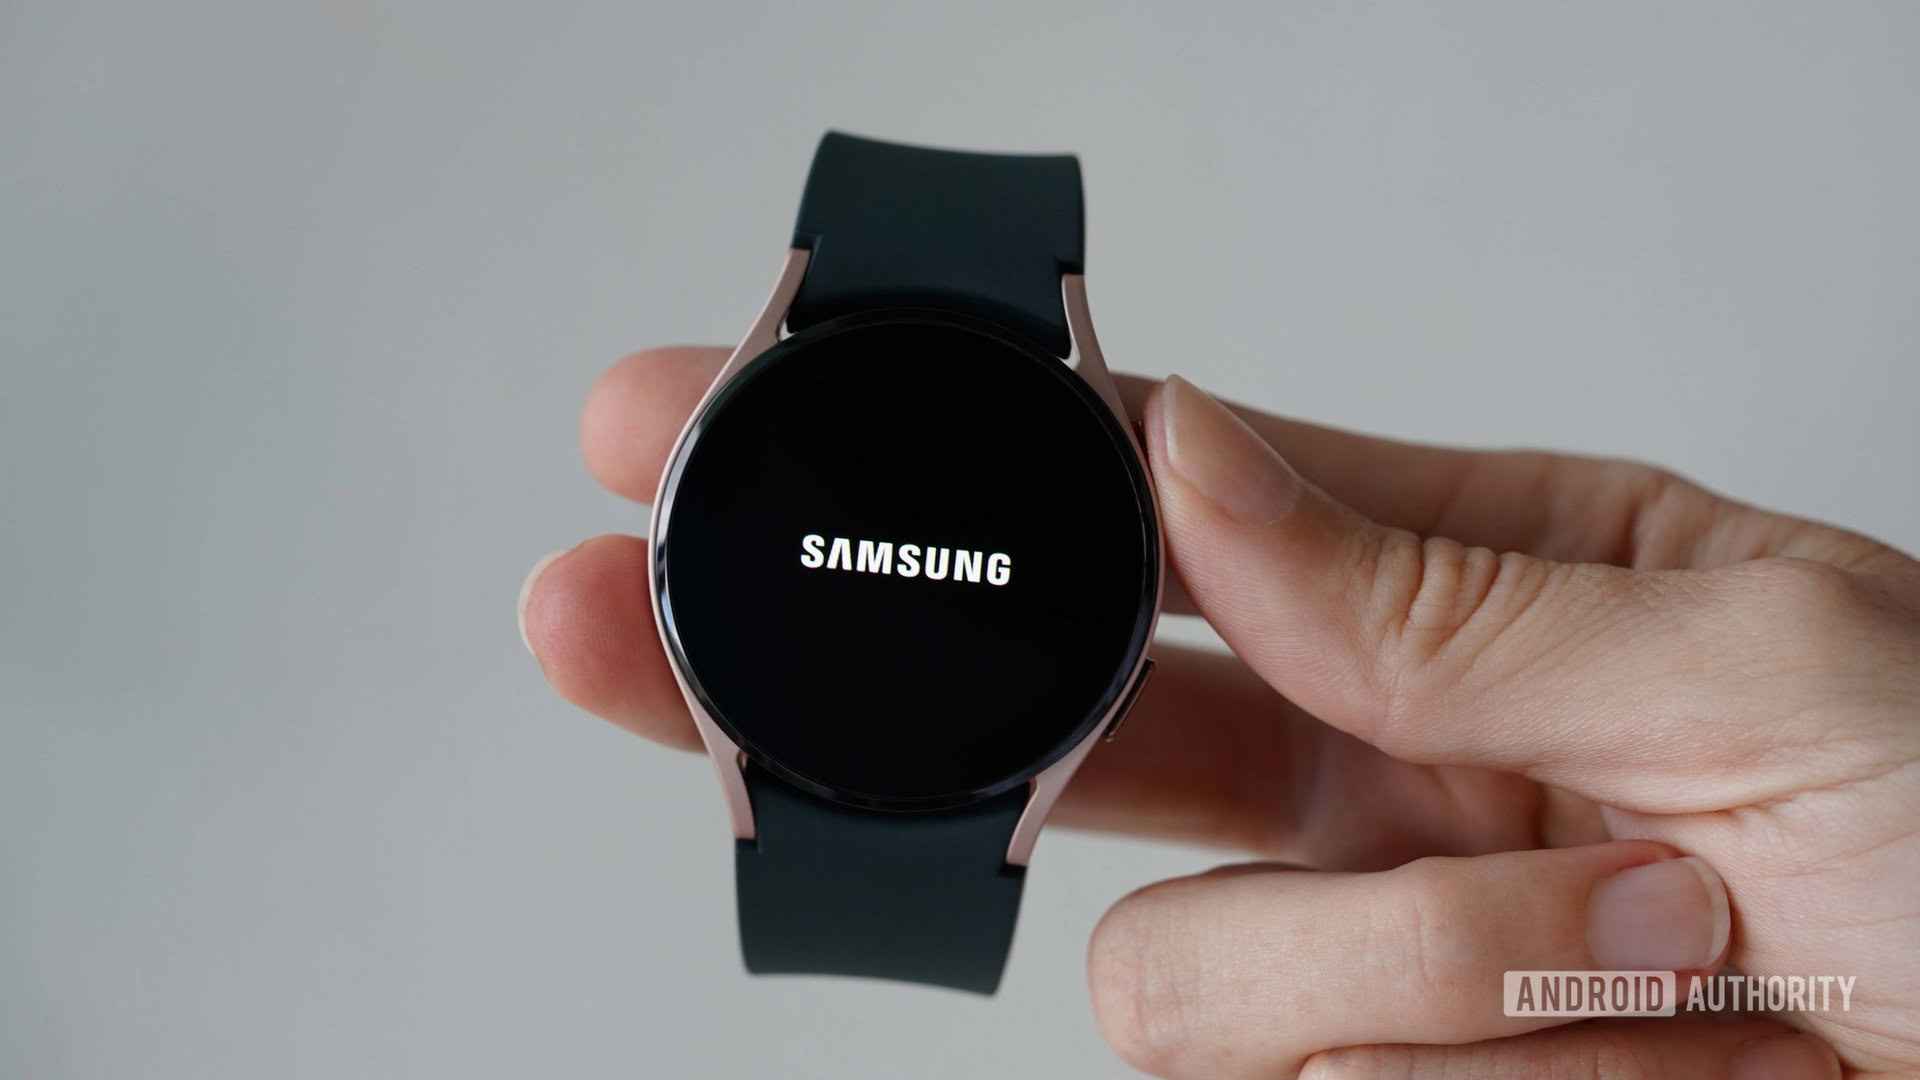 future smartwatches could include handy charging